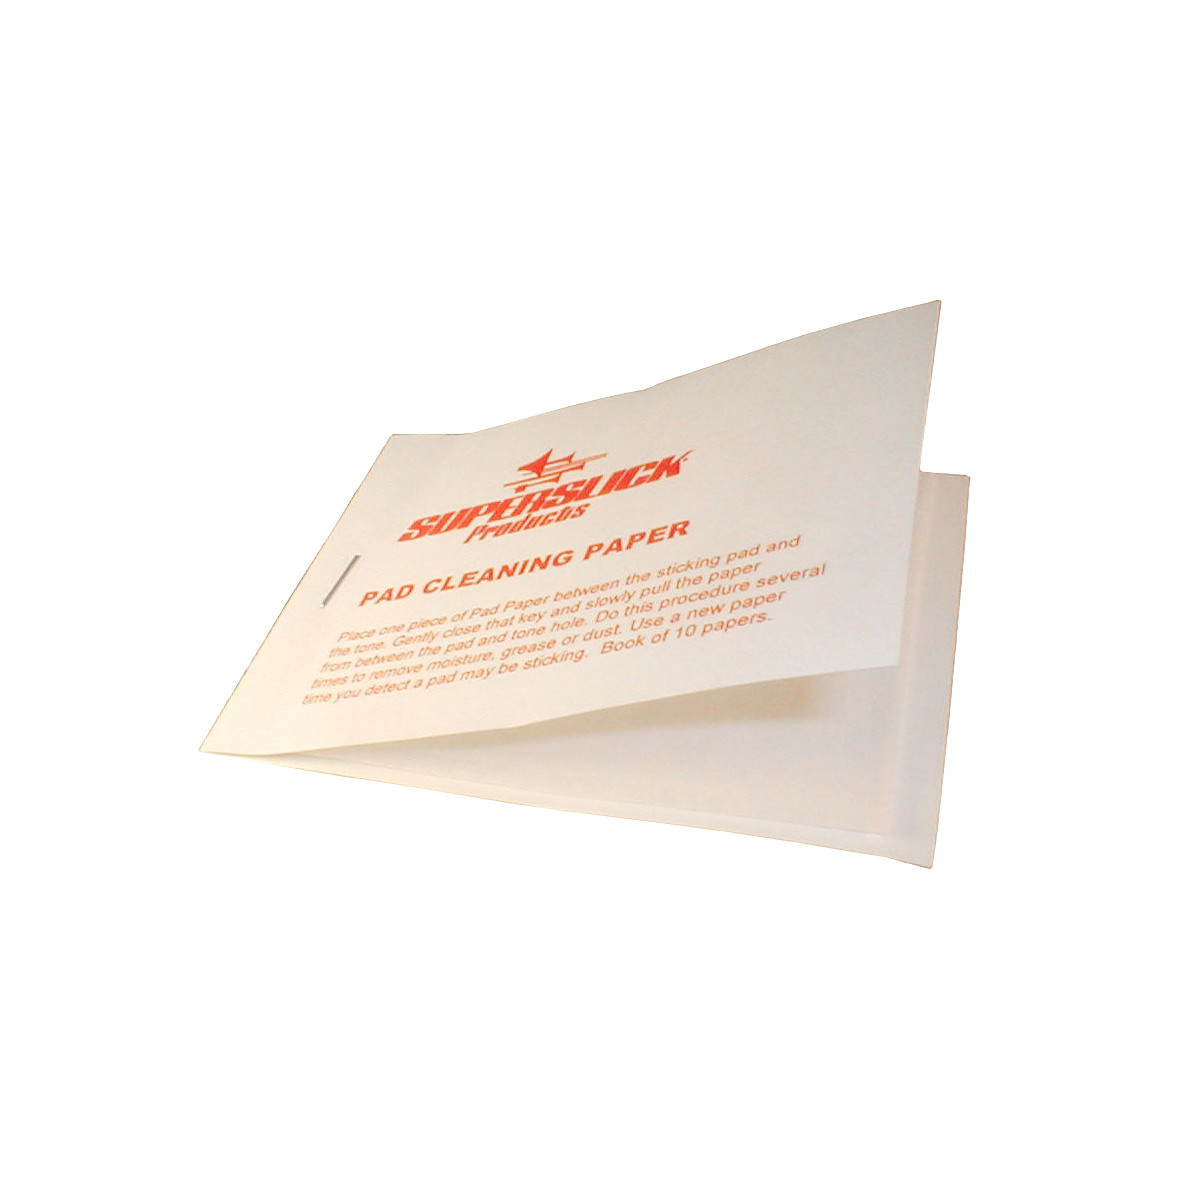 SUPERSLICK PADPAPER - BOOK OF 10 SHEETS OF PAD CLEANING PAPER 